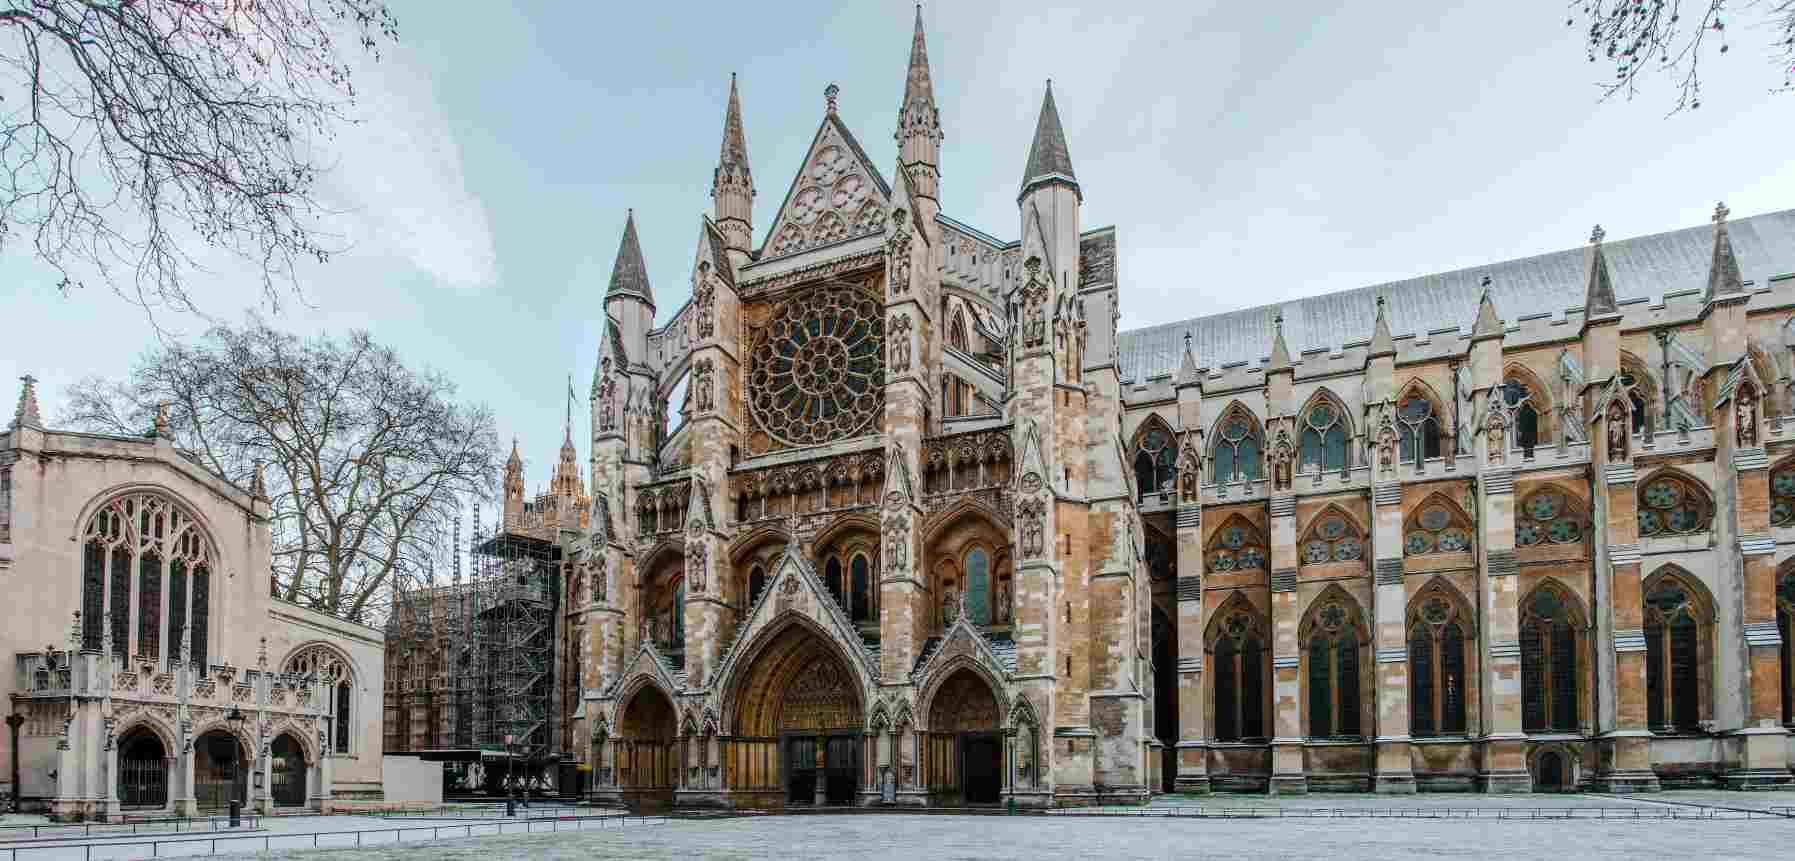 Take a tour of Westminster Abbey